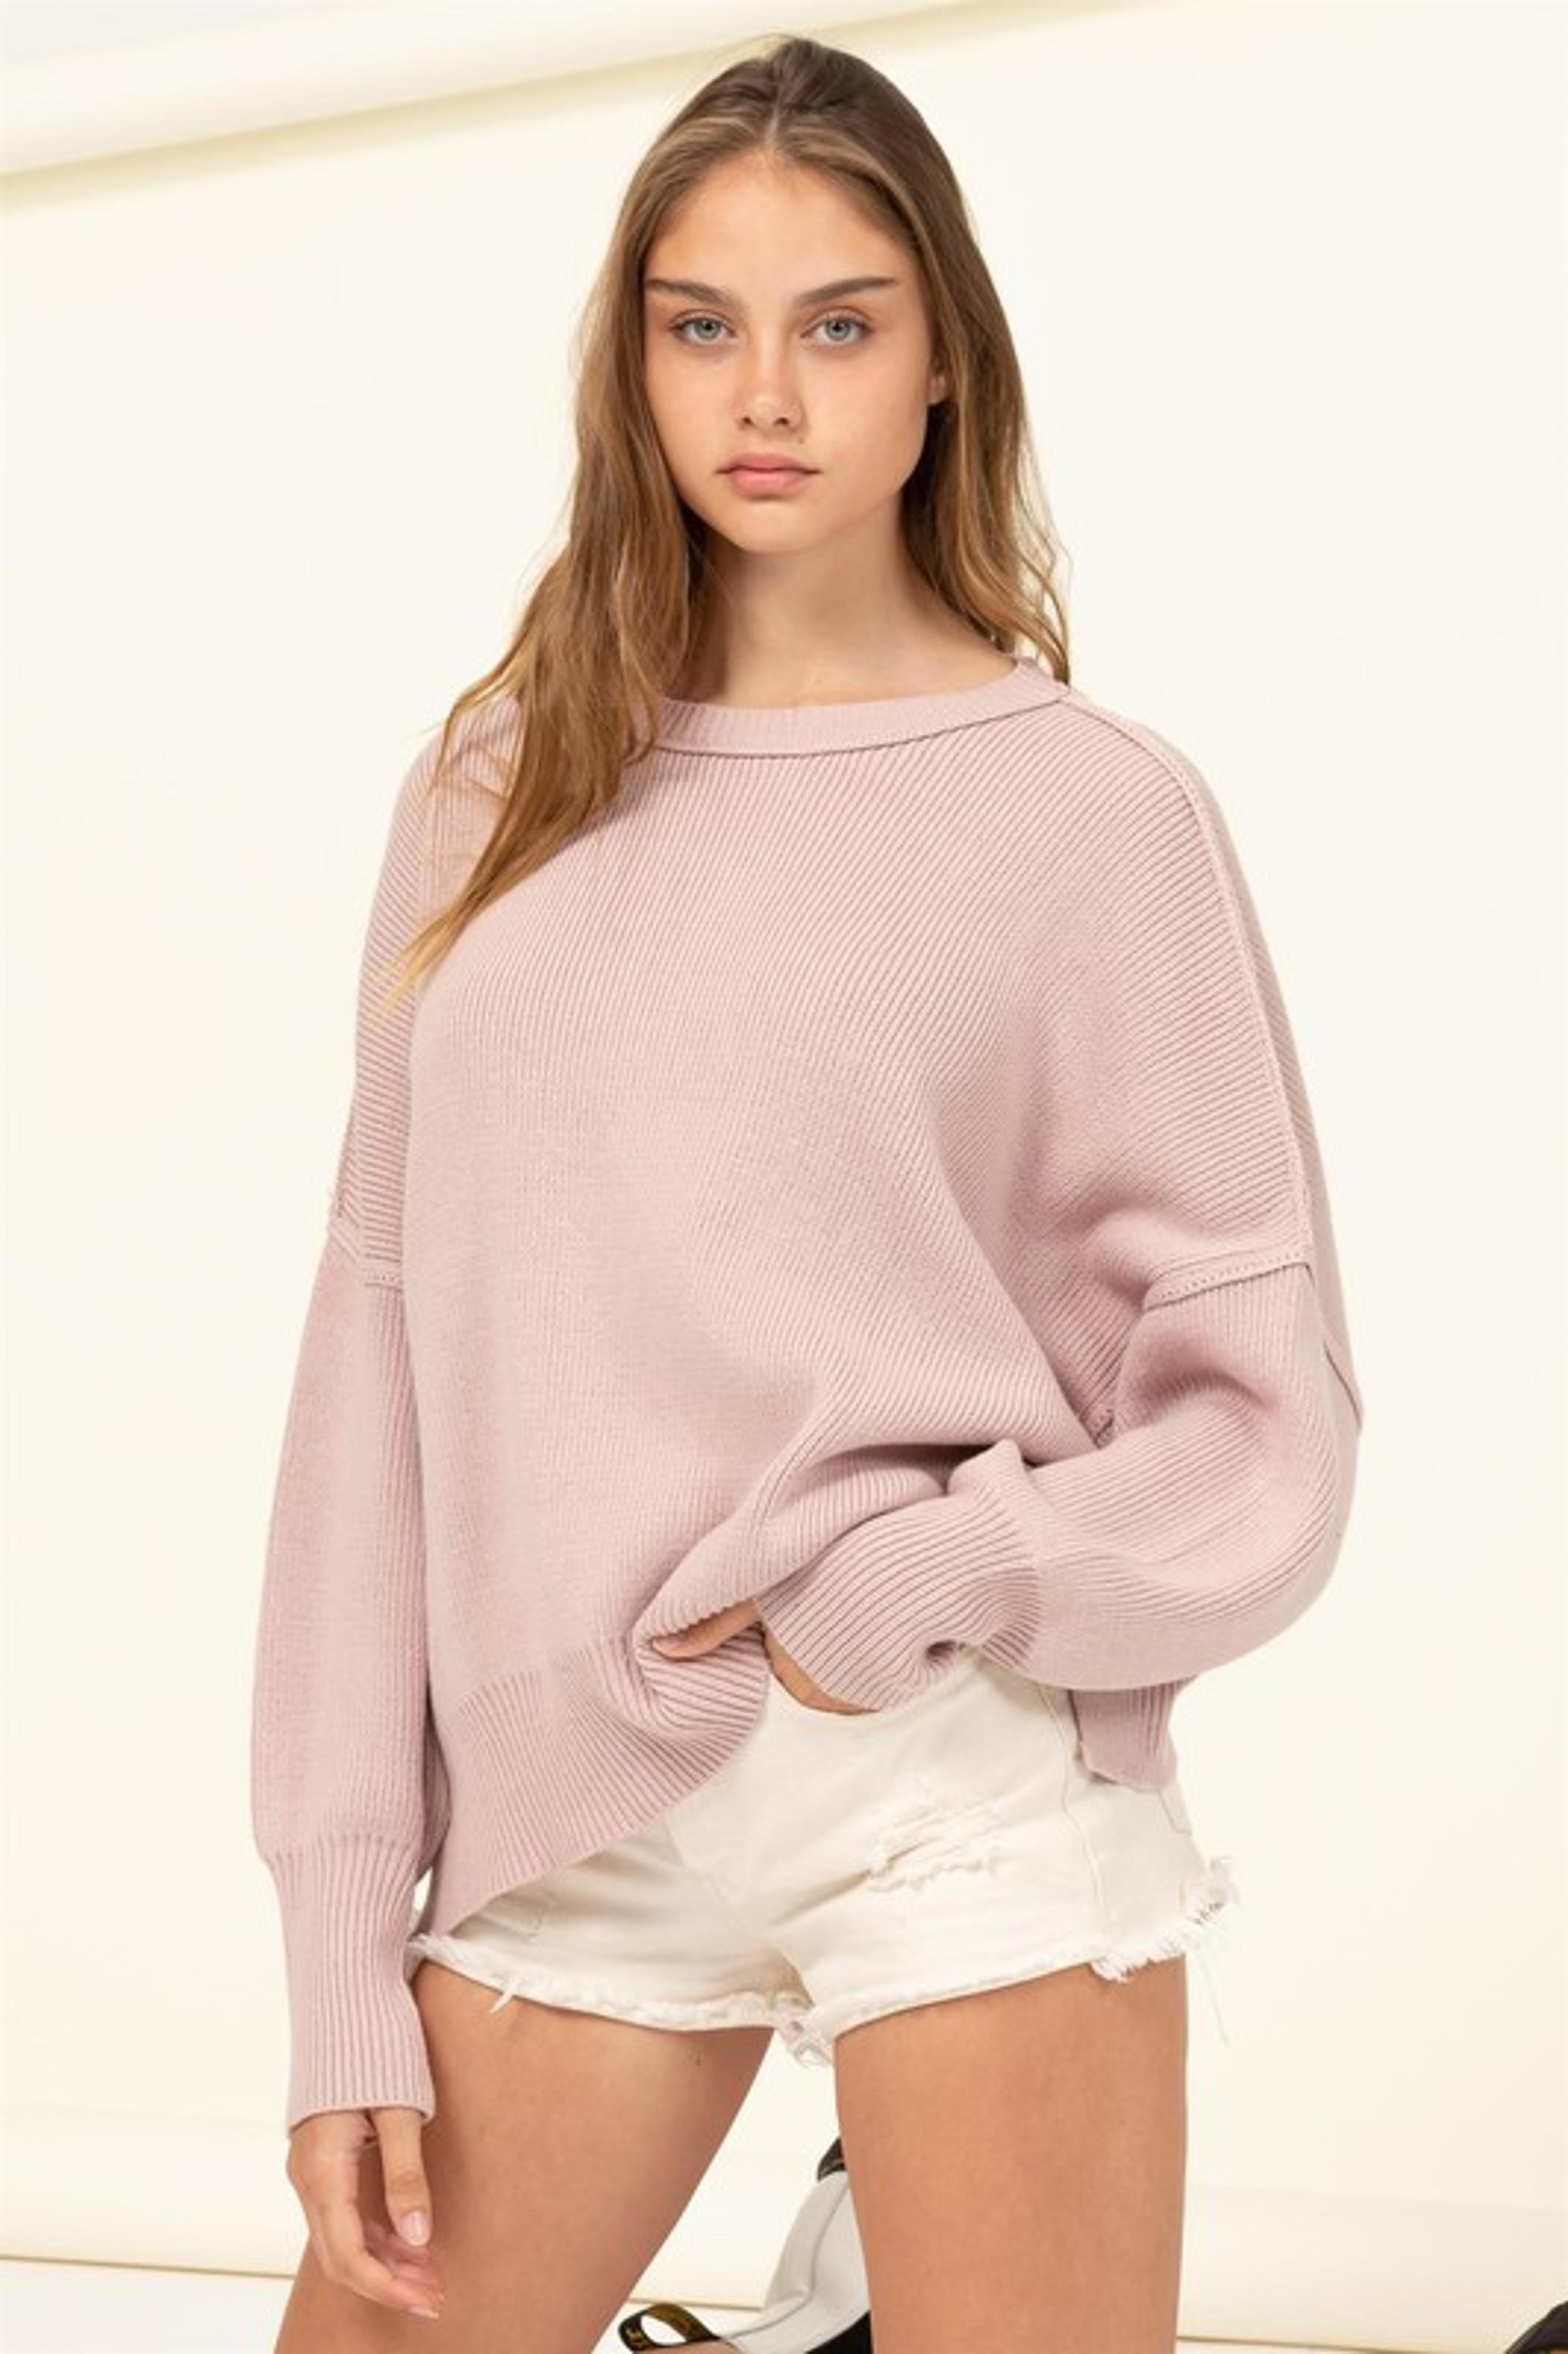  Star Moment Knit Sweater